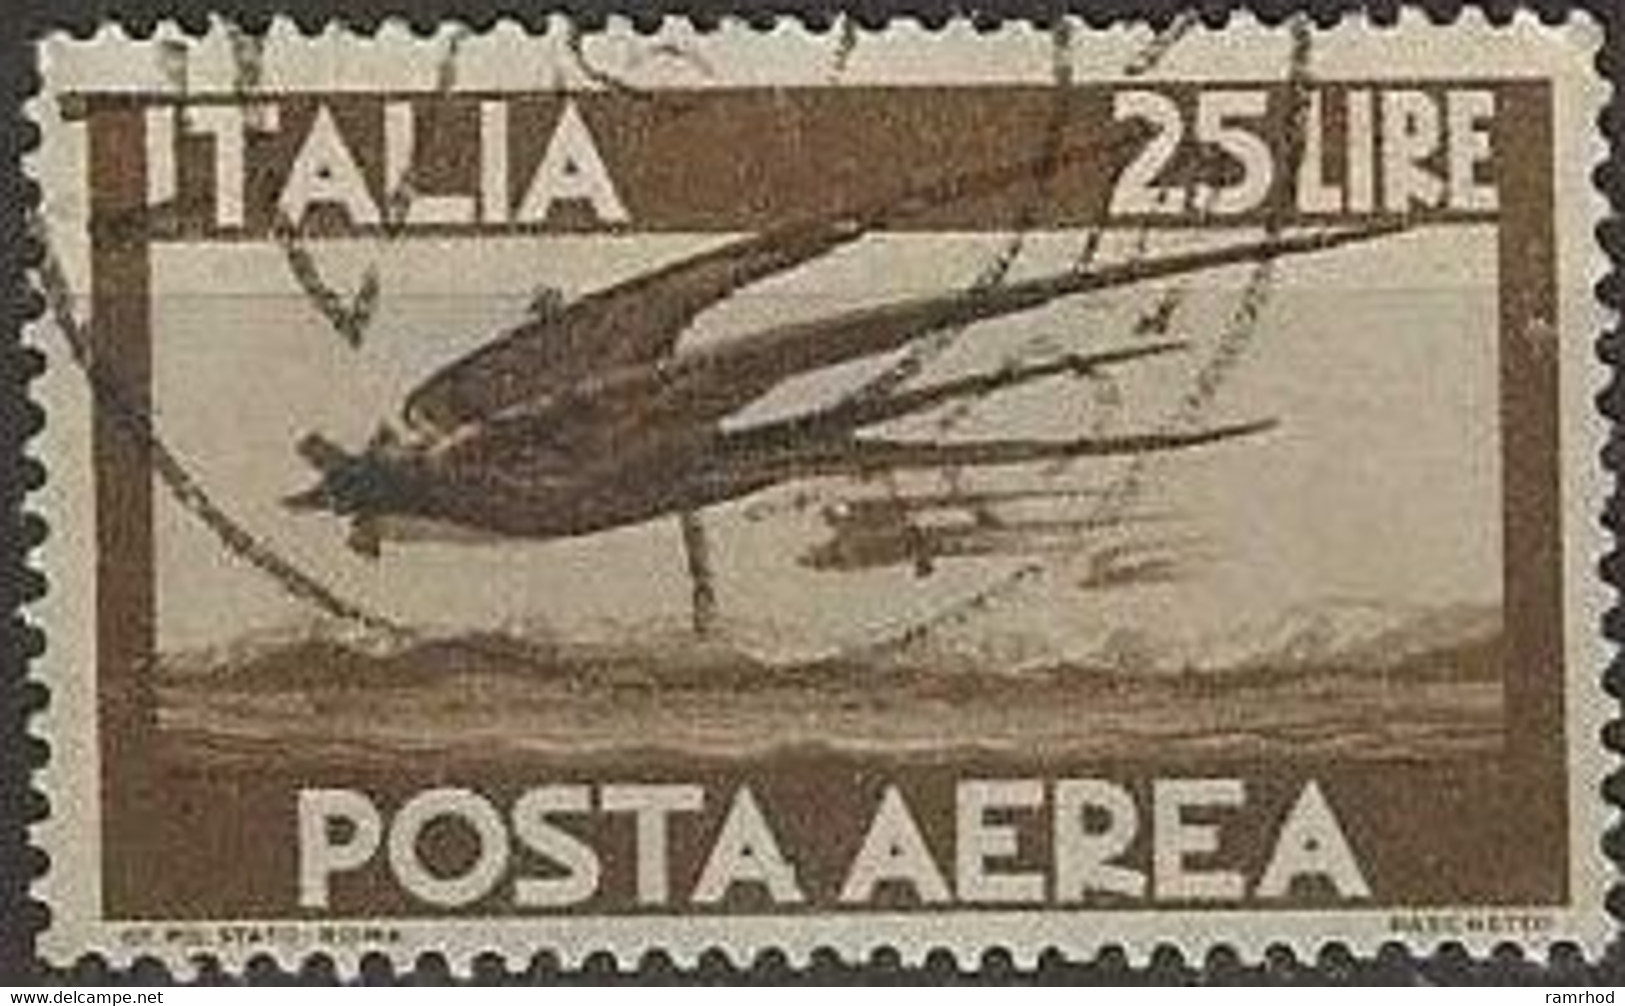 ITALY 1945 Air. Swallow In Flight - 25l. - Brown FU - Airmail